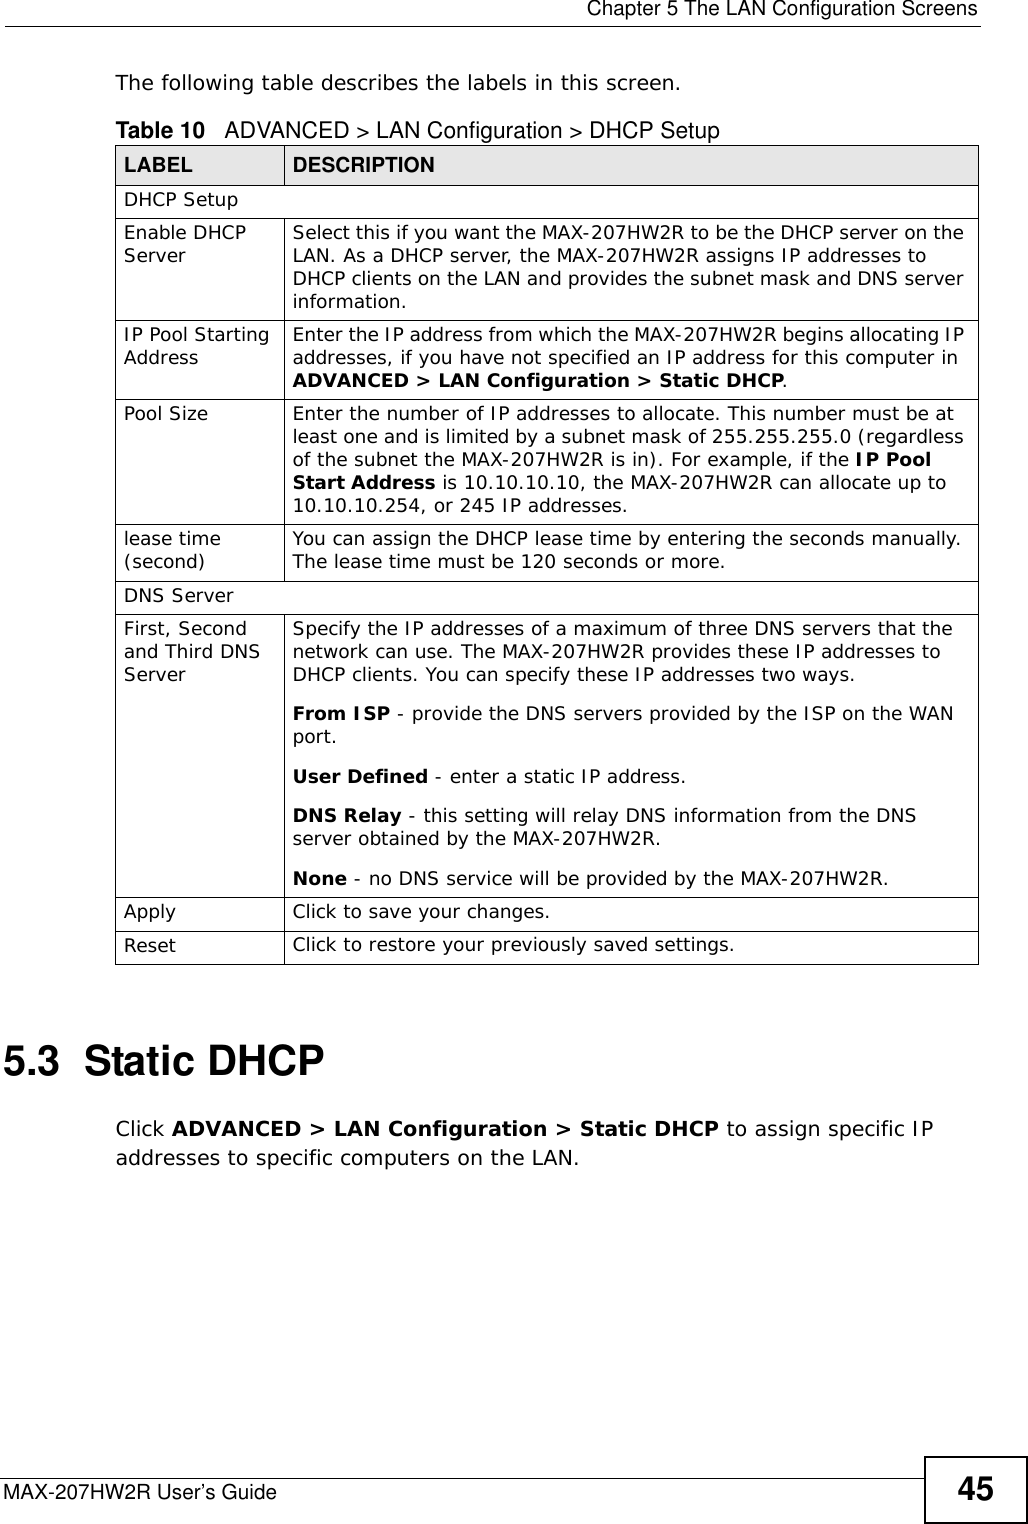  Chapter 5 The LAN Configuration ScreensMAX-207HW2R User’s Guide 45The following table describes the labels in this screen.      5.3  Static DHCPClick ADVANCED &gt; LAN Configuration &gt; Static DHCP to assign specific IP addresses to specific computers on the LAN.Table 10   ADVANCED &gt; LAN Configuration &gt; DHCP SetupLABEL DESCRIPTIONDHCP SetupEnable DHCP Server Select this if you want the MAX-207HW2R to be the DHCP server on the LAN. As a DHCP server, the MAX-207HW2R assigns IP addresses to DHCP clients on the LAN and provides the subnet mask and DNS server information.IP Pool Starting Address Enter the IP address from which the MAX-207HW2R begins allocating IP addresses, if you have not specified an IP address for this computer in ADVANCED &gt; LAN Configuration &gt; Static DHCP.Pool Size Enter the number of IP addresses to allocate. This number must be at least one and is limited by a subnet mask of 255.255.255.0 (regardless of the subnet the MAX-207HW2R is in). For example, if the IP Pool Start Address is 10.10.10.10, the MAX-207HW2R can allocate up to 10.10.10.254, or 245 IP addresses.lease time (second) You can assign the DHCP lease time by entering the seconds manually. The lease time must be 120 seconds or more.DNS ServerFirst, Second and Third DNS ServerSpecify the IP addresses of a maximum of three DNS servers that the network can use. The MAX-207HW2R provides these IP addresses to DHCP clients. You can specify these IP addresses two ways.From ISP - provide the DNS servers provided by the ISP on the WAN port.User Defined - enter a static IP address.DNS Relay - this setting will relay DNS information from the DNS server obtained by the MAX-207HW2R.None - no DNS service will be provided by the MAX-207HW2R.Apply Click to save your changes.Reset Click to restore your previously saved settings.